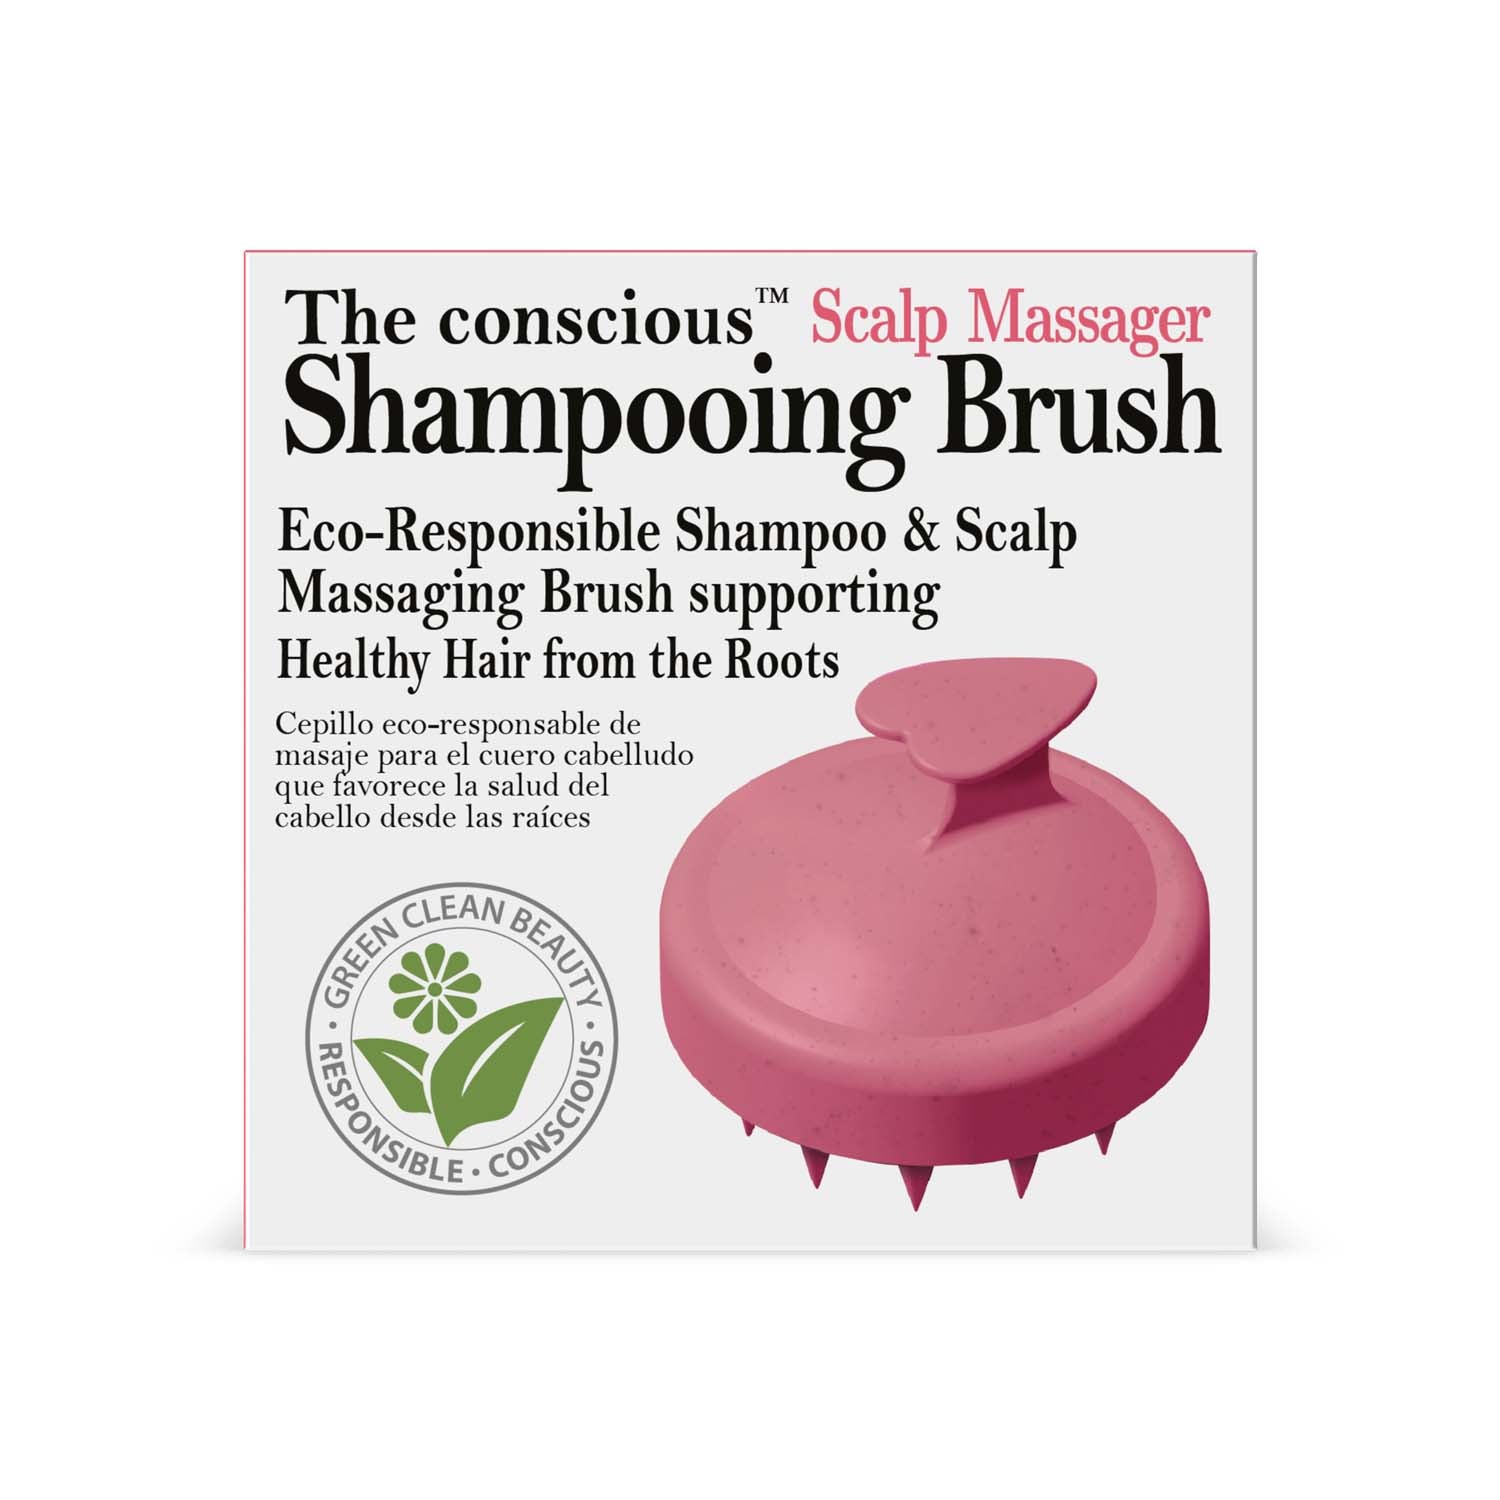 The conscious™ Biodegradable Scalp Massager, Shampooing Brush - PINK